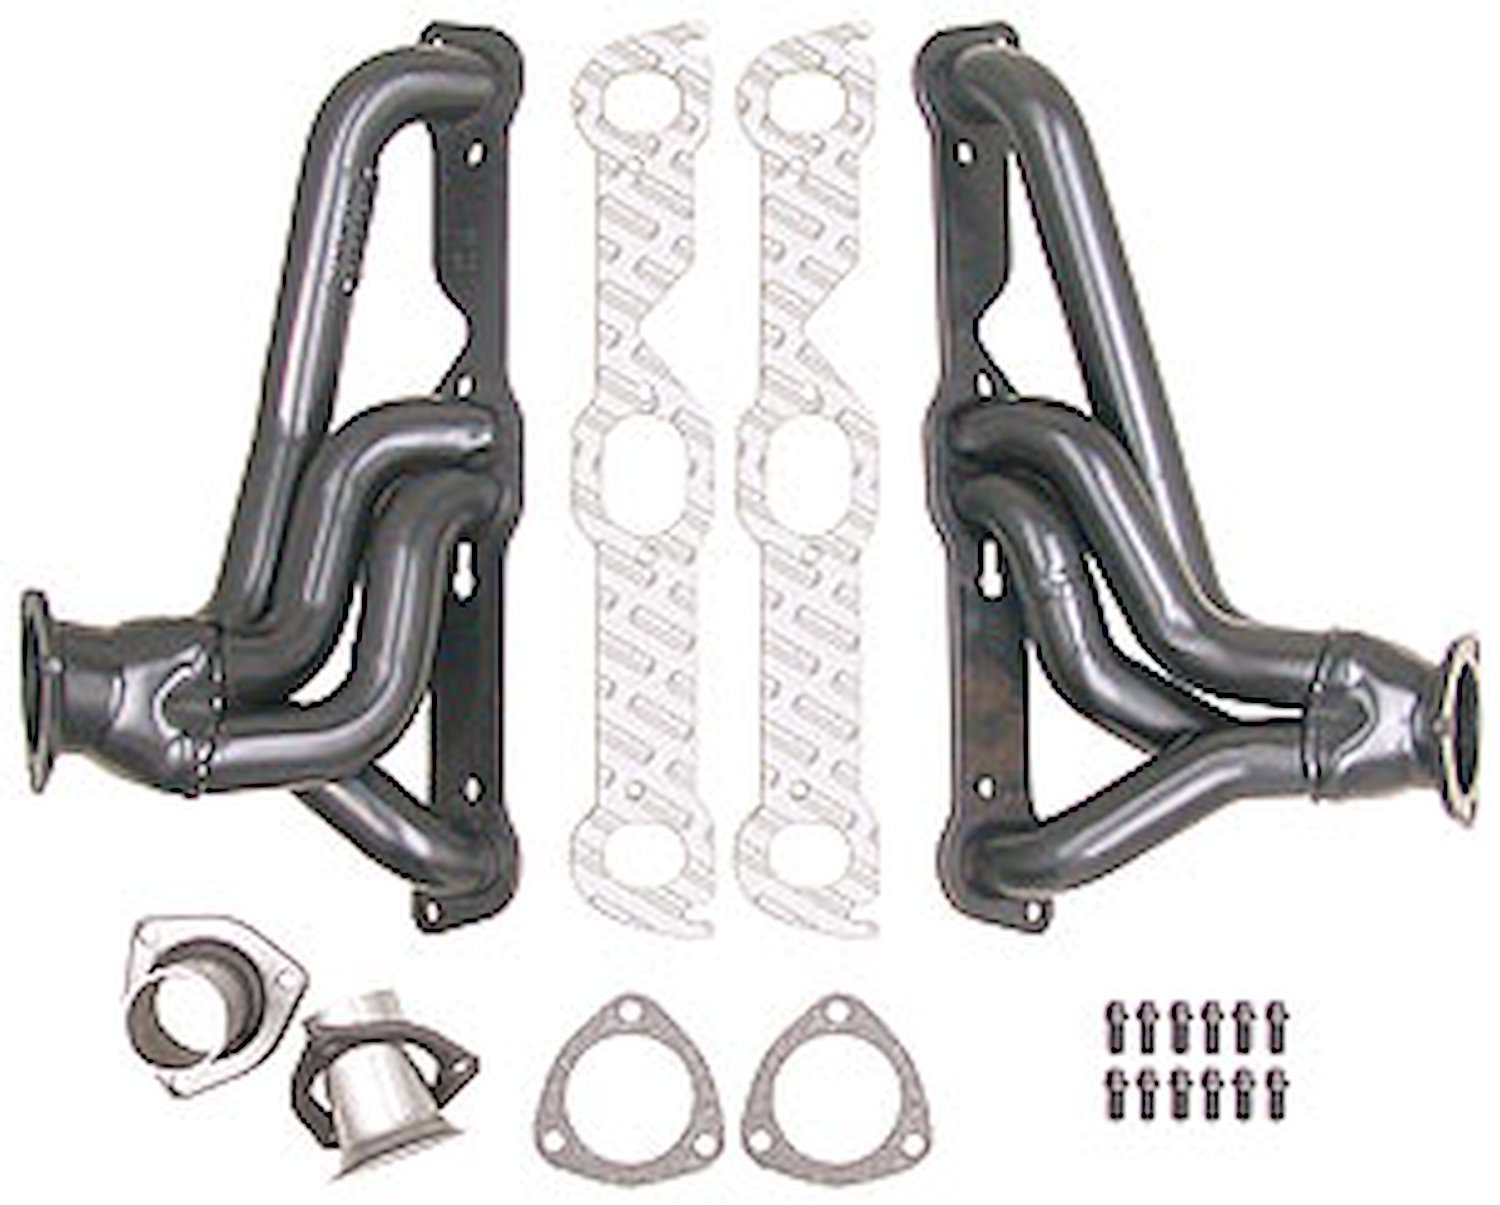 Standard-Duty Uncoated Shorty Headers 1964-72 Pontiac GTO/Le Mans/Tempest 326/389/455